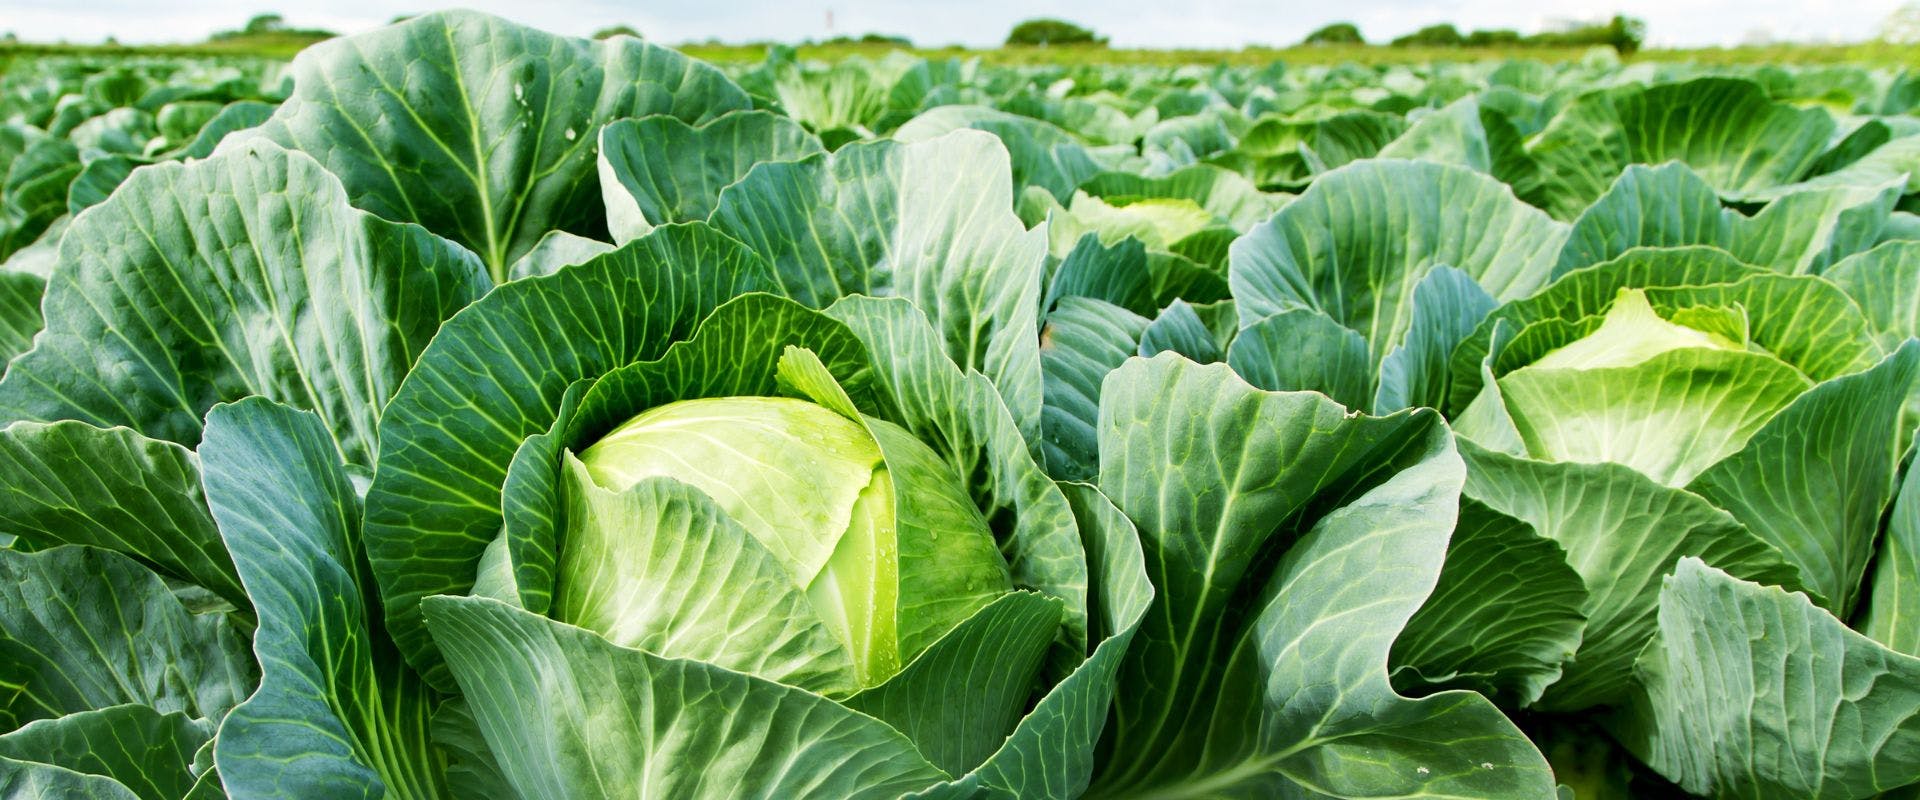 Cabbages growing in a field